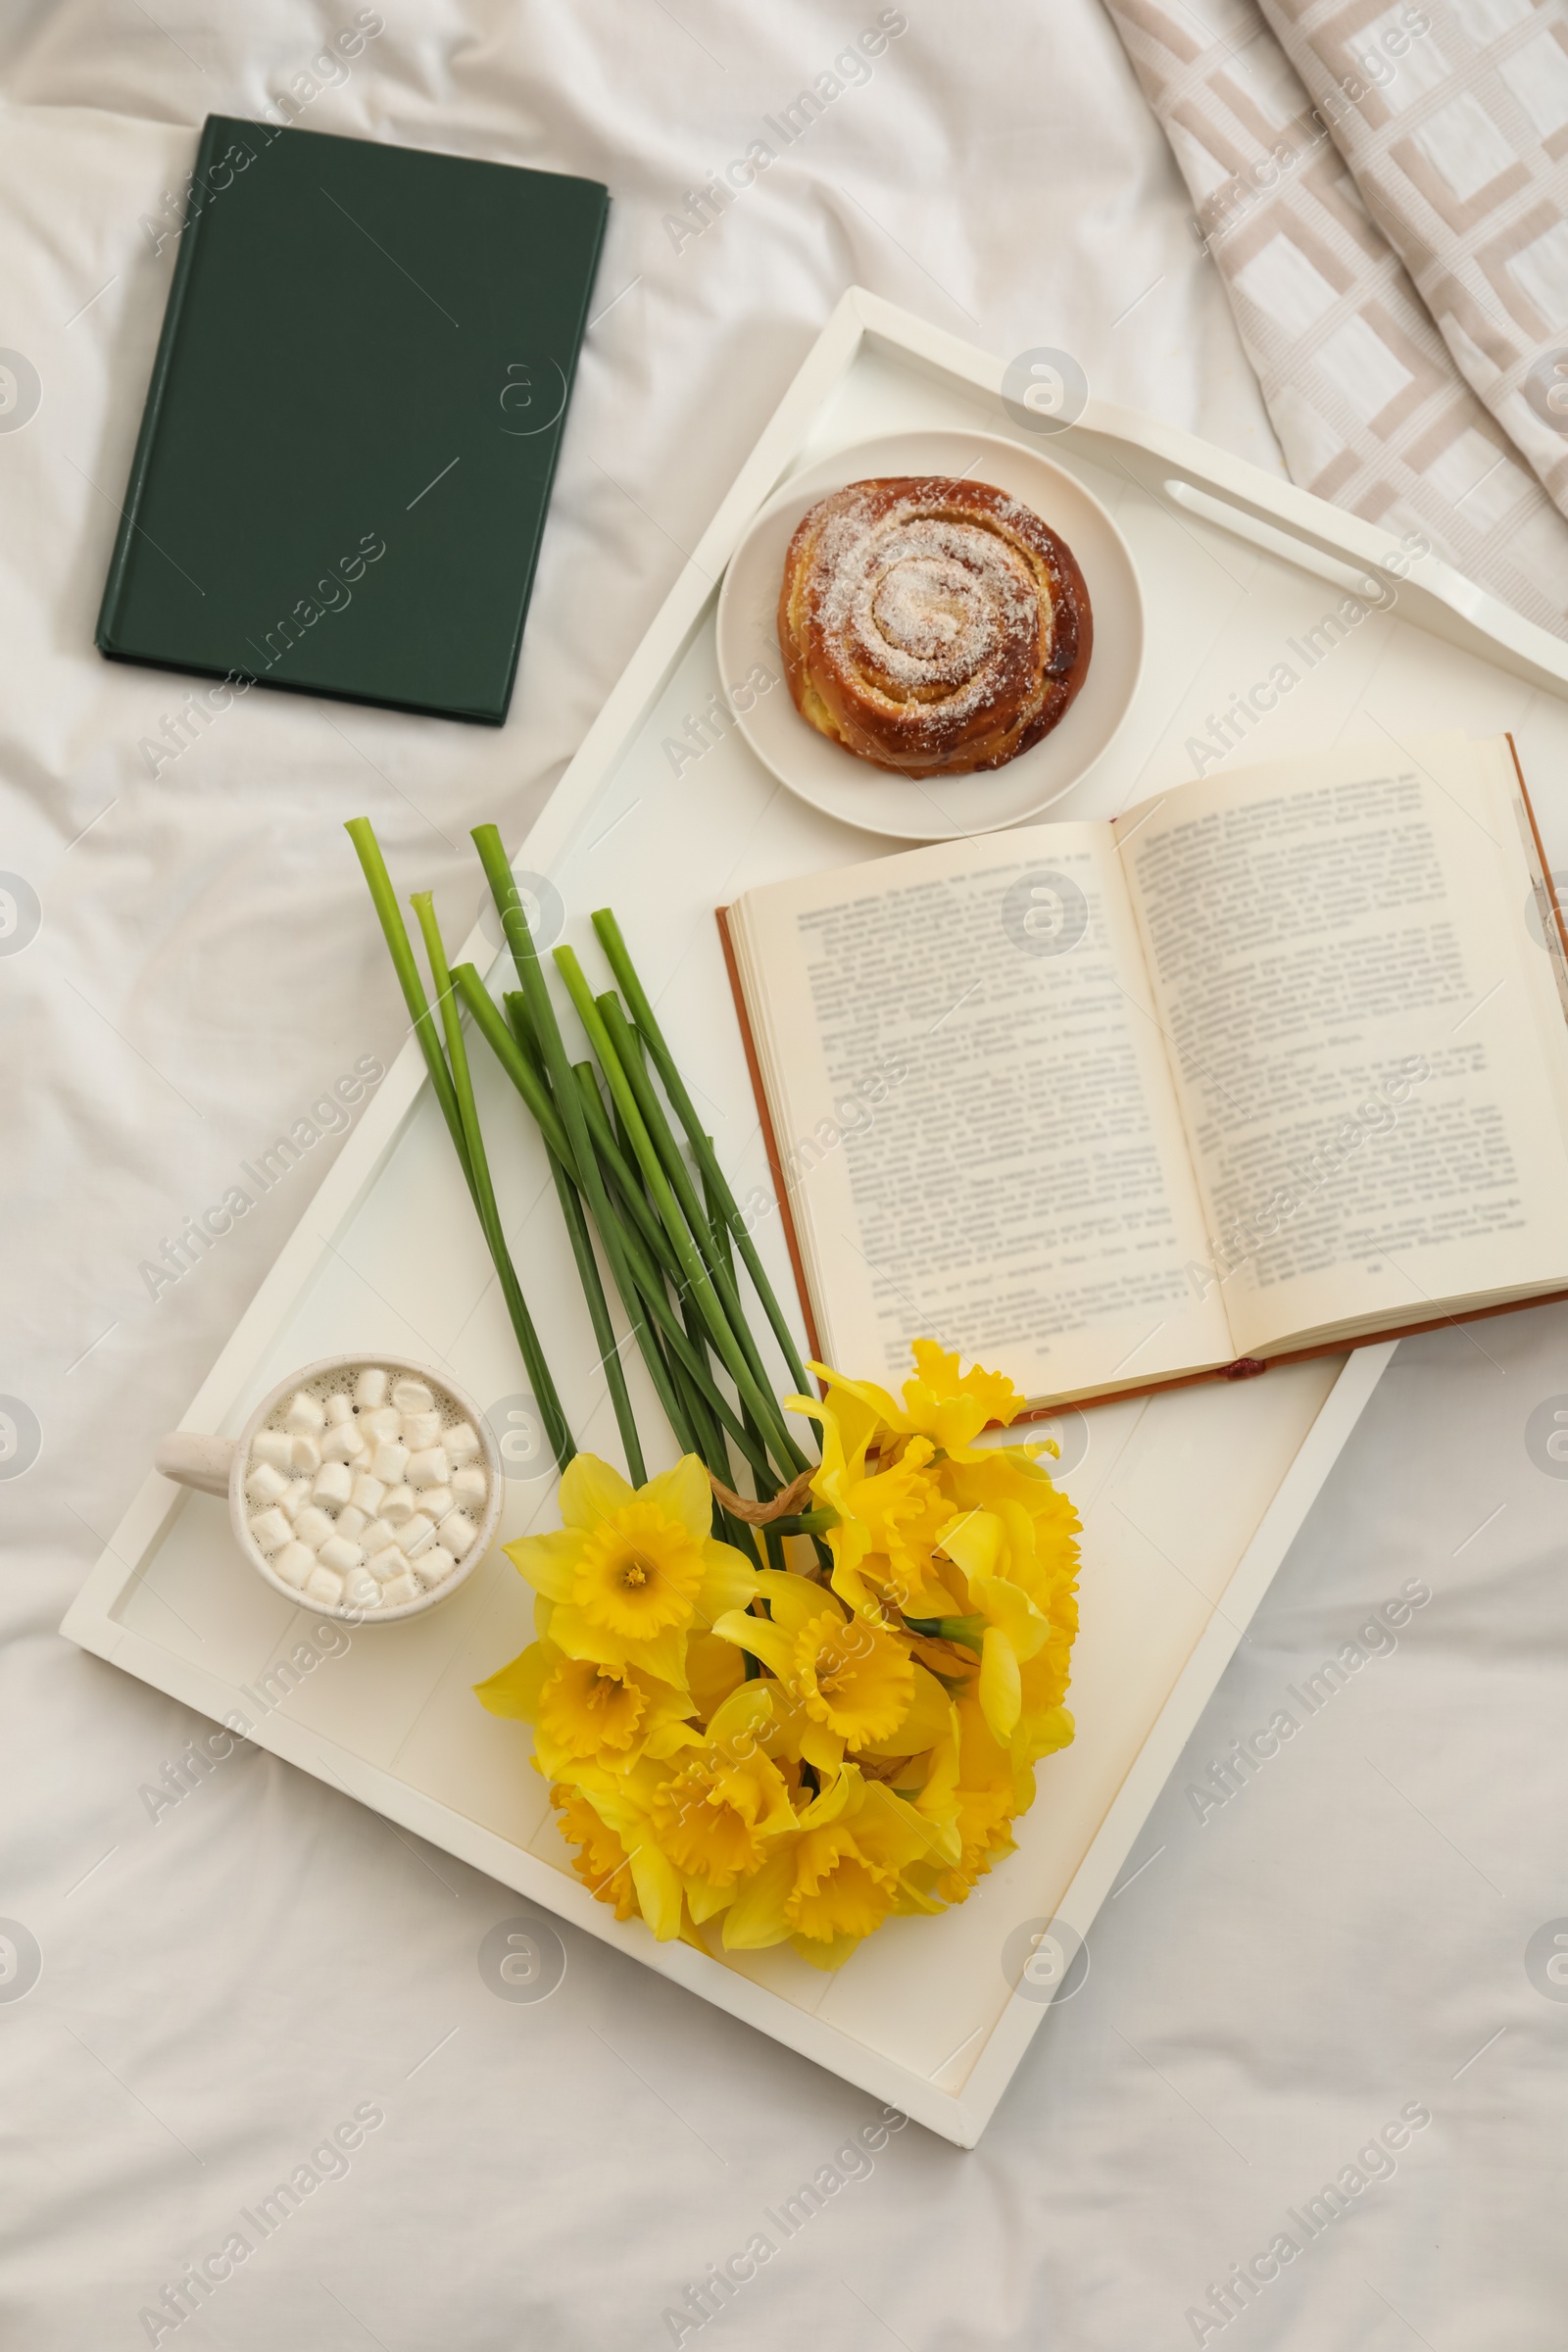 Photo of Bouquet of beautiful daffodils, bun and coffee on bed, top view